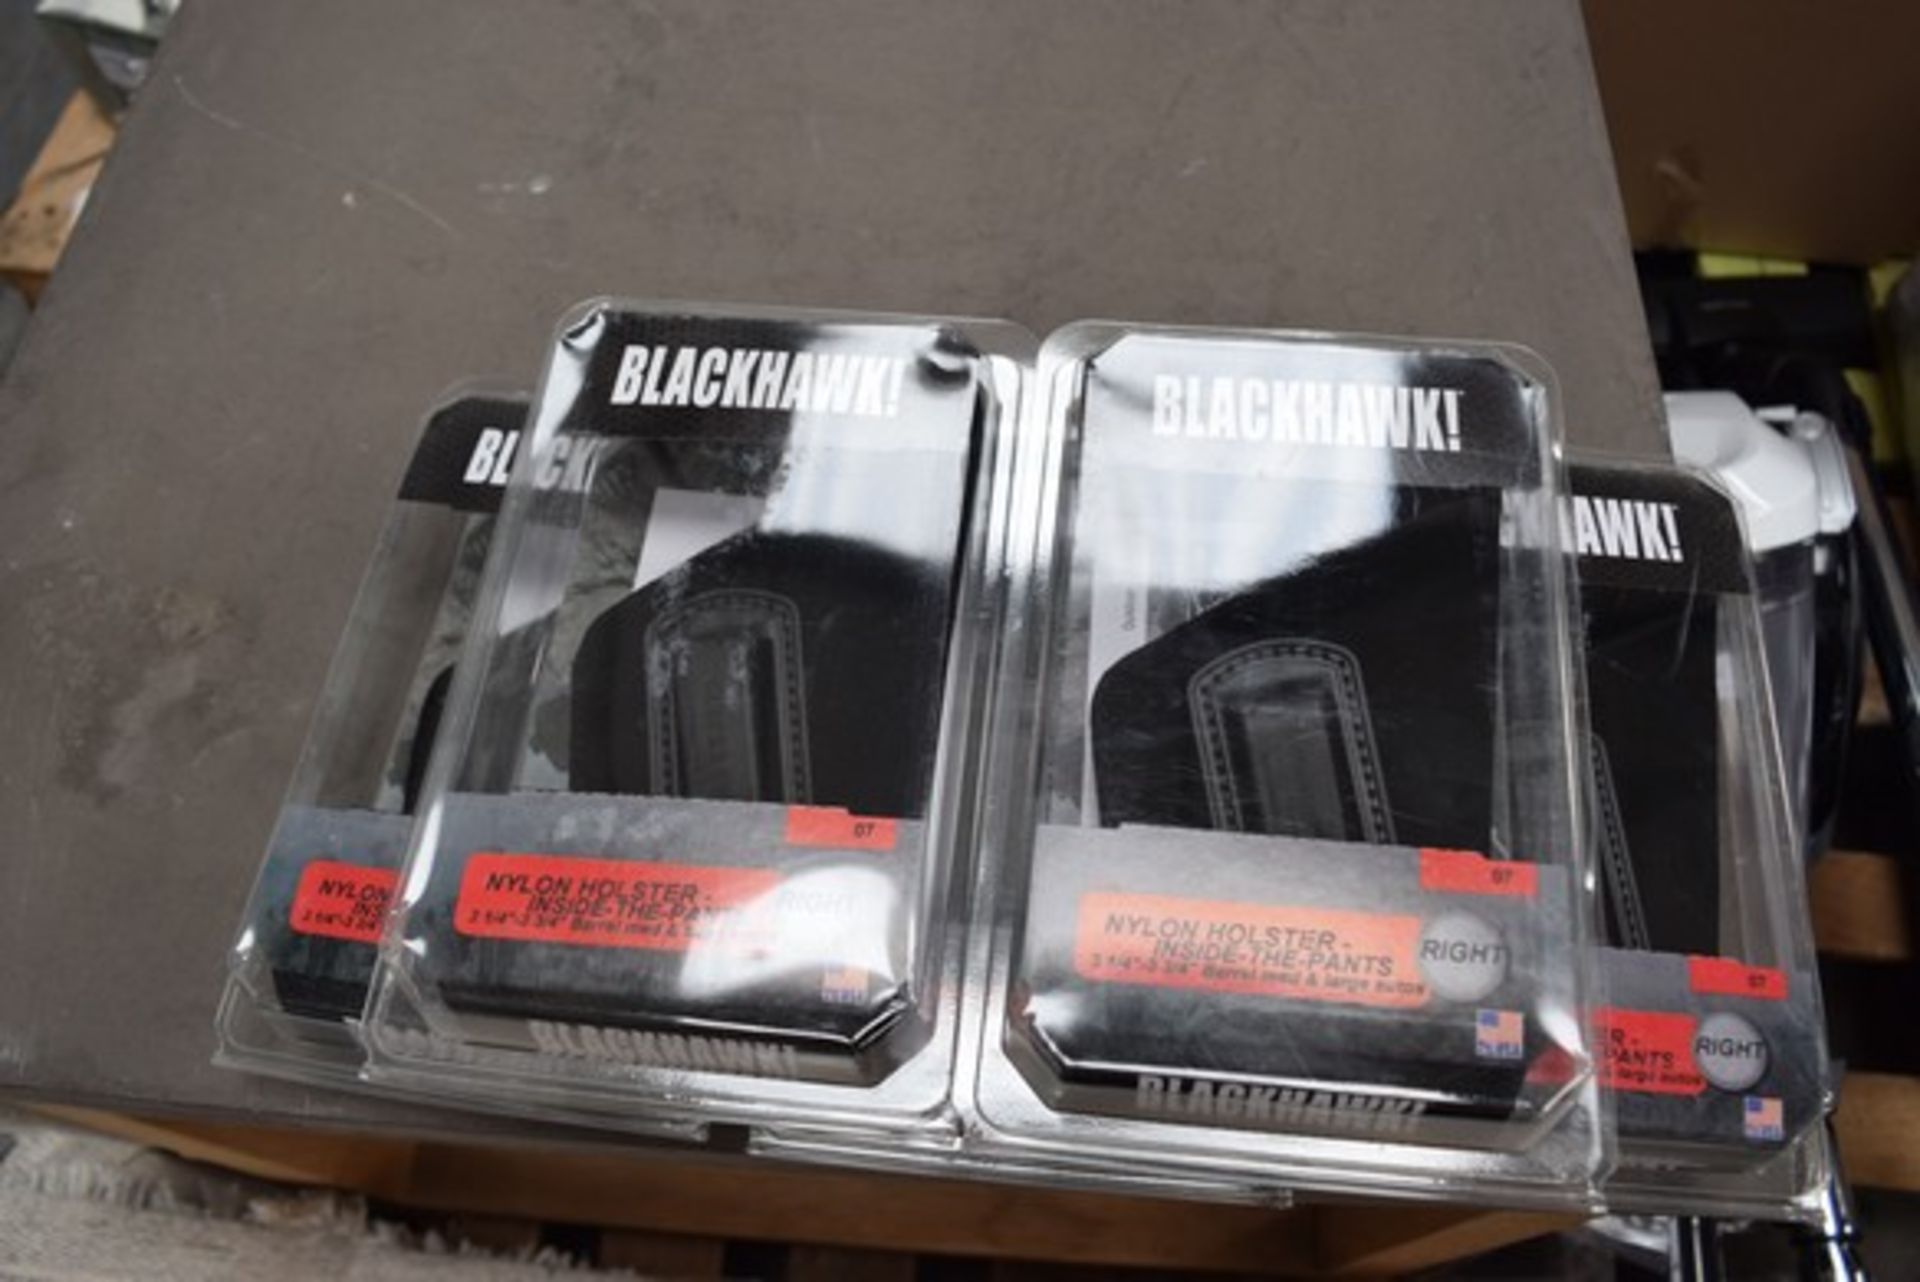 5 x MANUFACTURE SEALED BLACK HAWK NYLON HOLSTERS FOR AUTOMATIC WEAPONS RRP £13 EACH 26.05.17 *PLEASE